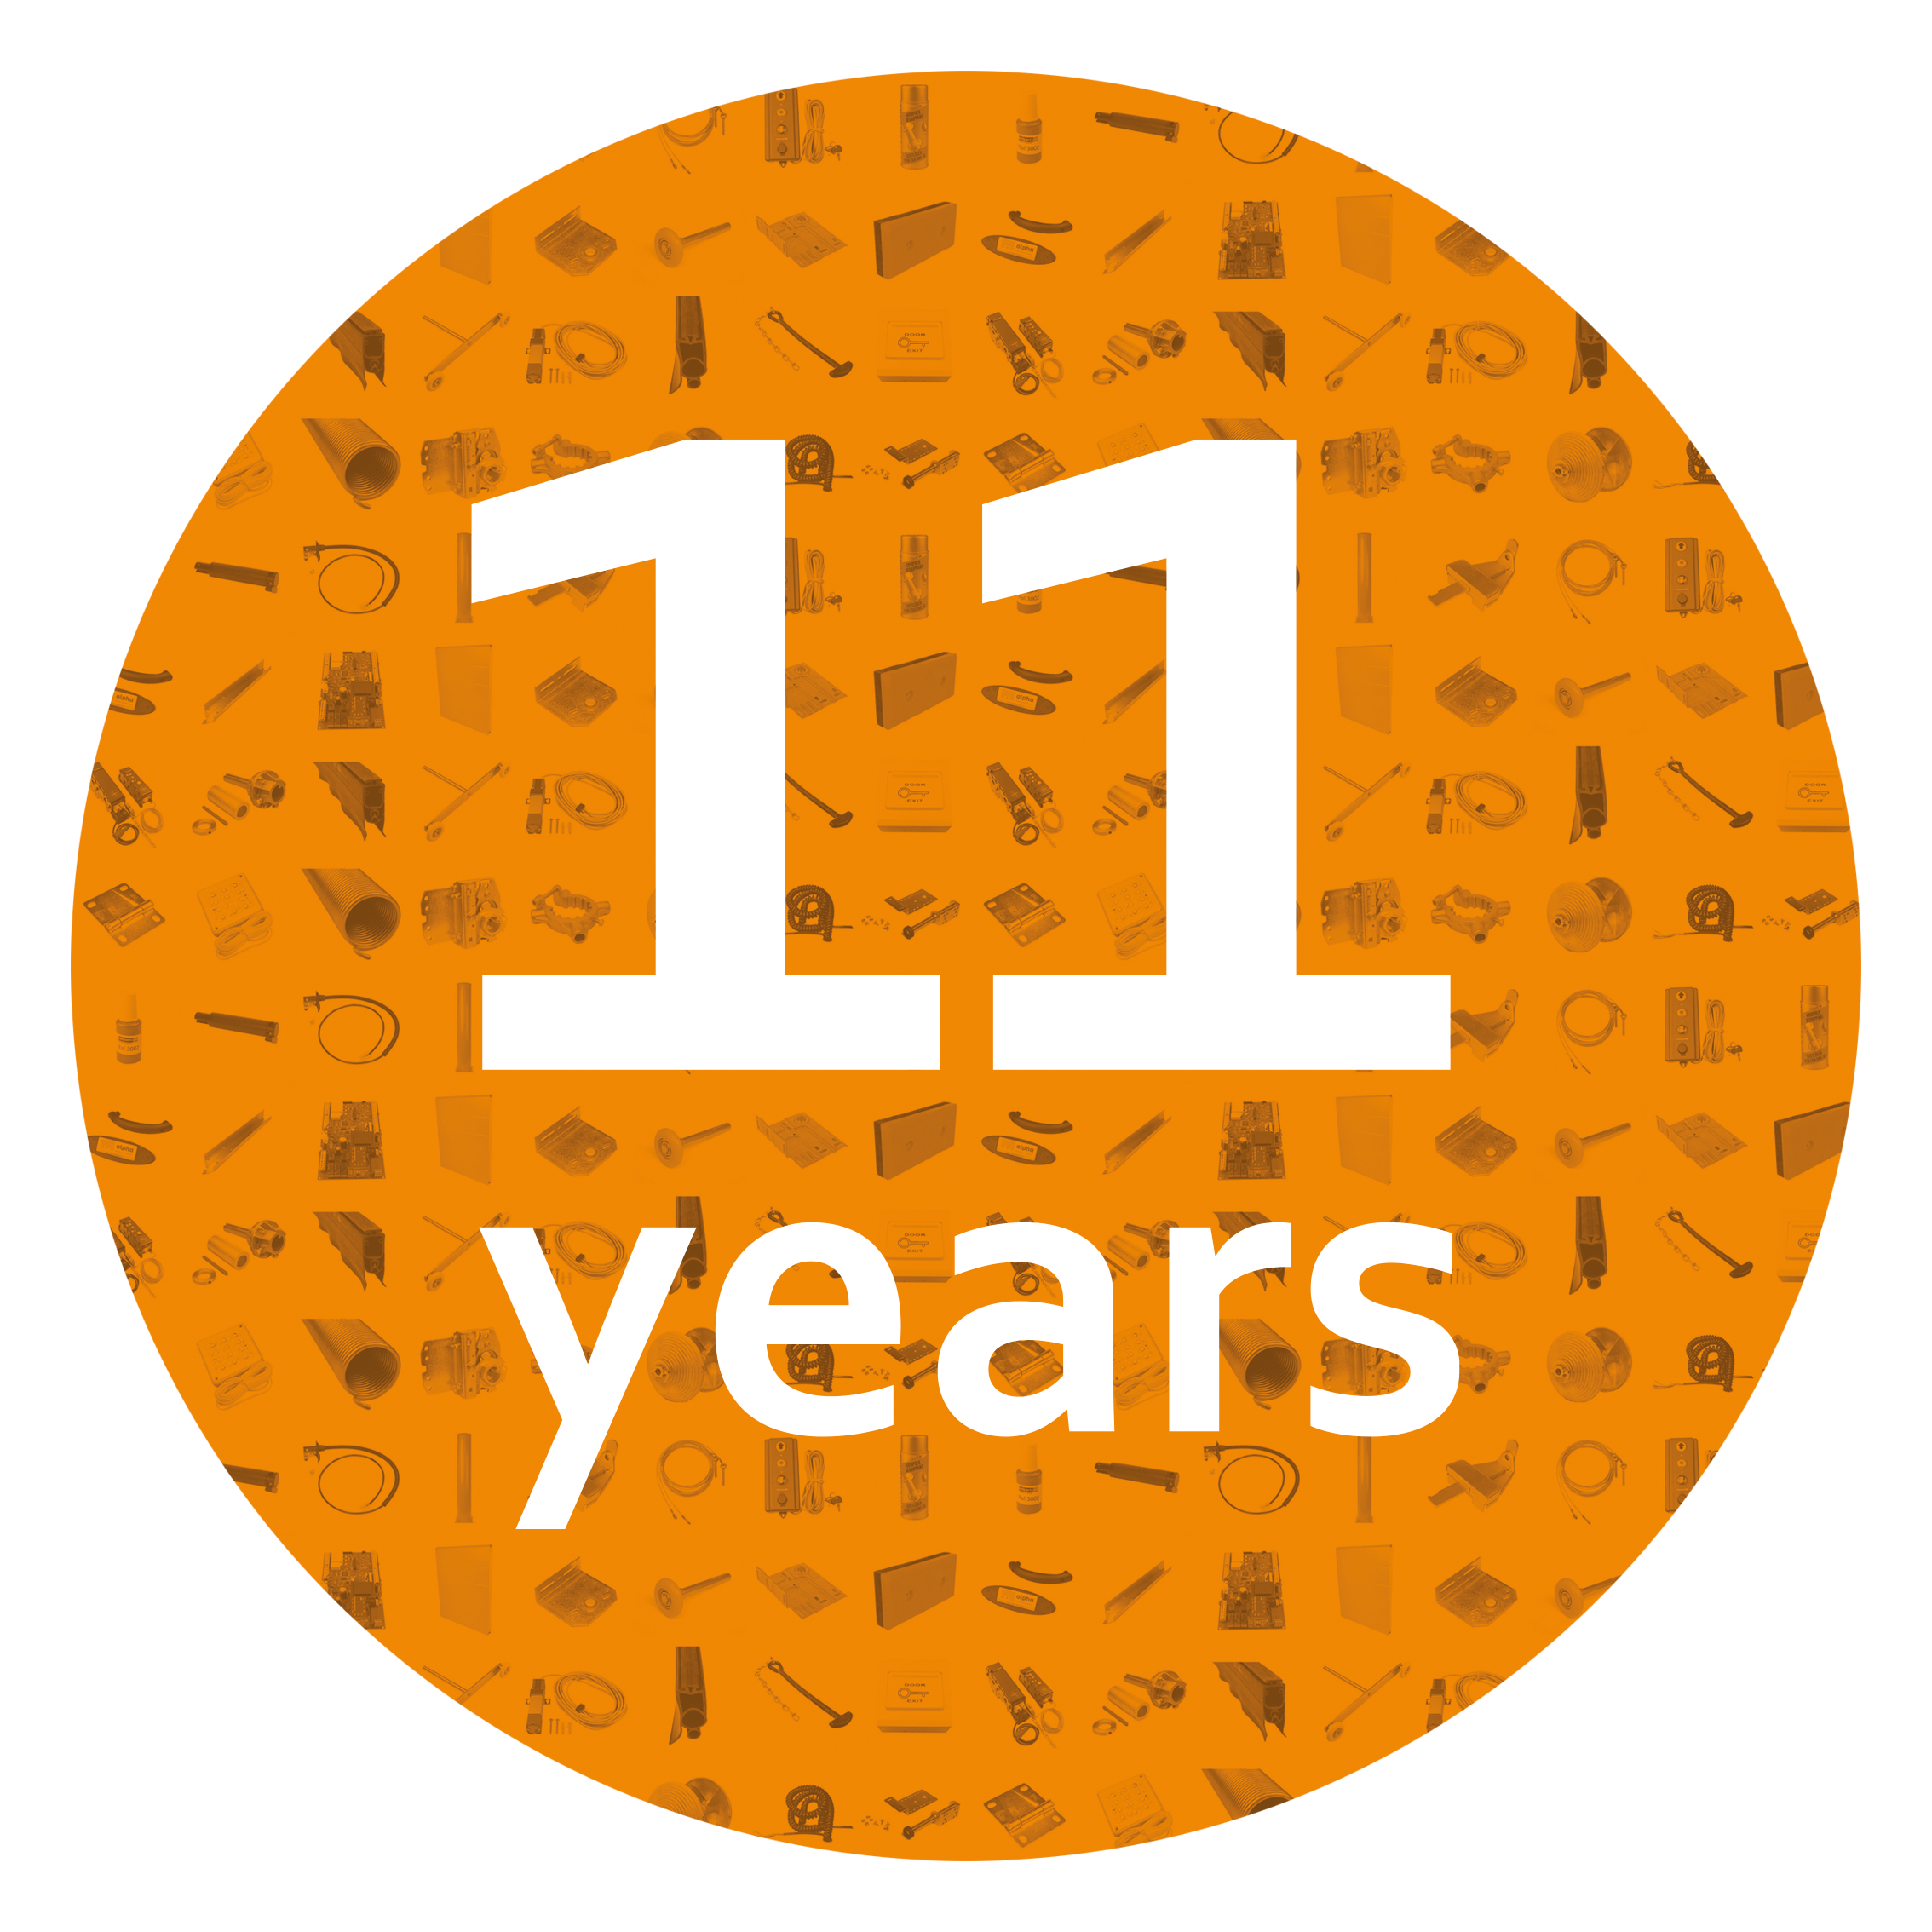 IDD-Parts 11 years!